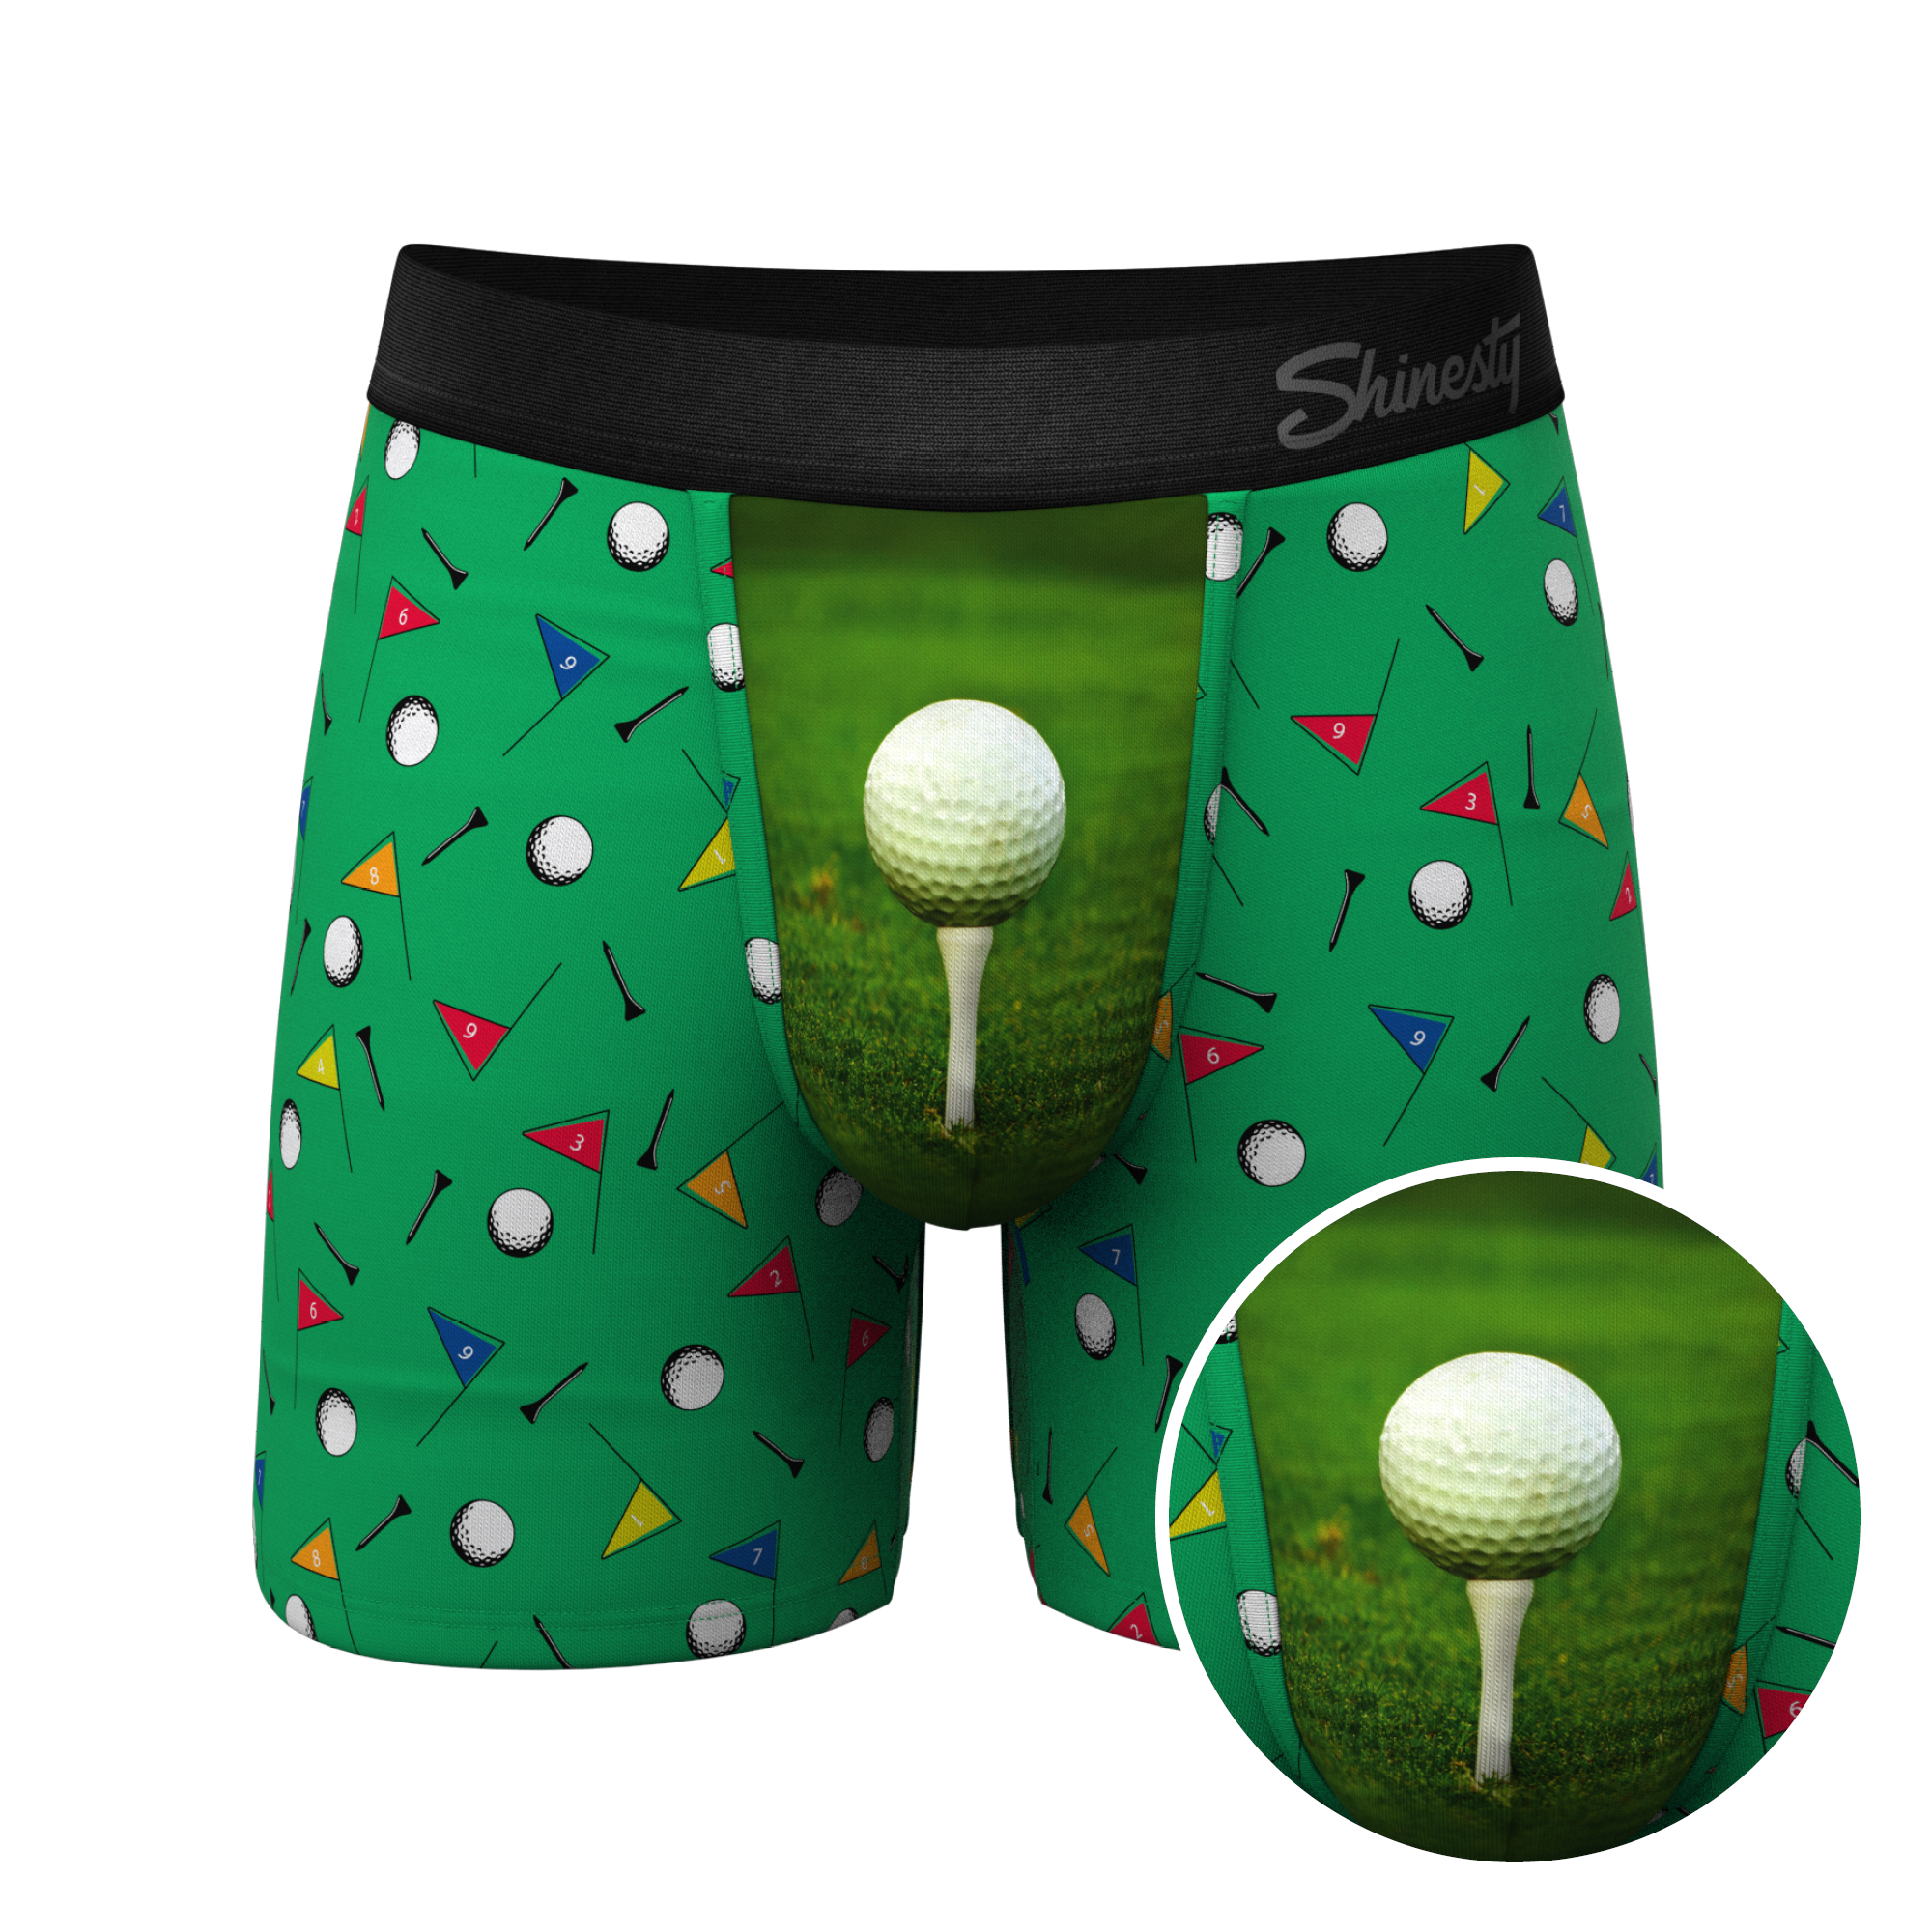 https://cdn.shopify.com/s/files/1/0234/5963/products/FrontNineGolfBXStnrd.png?v=1680549185